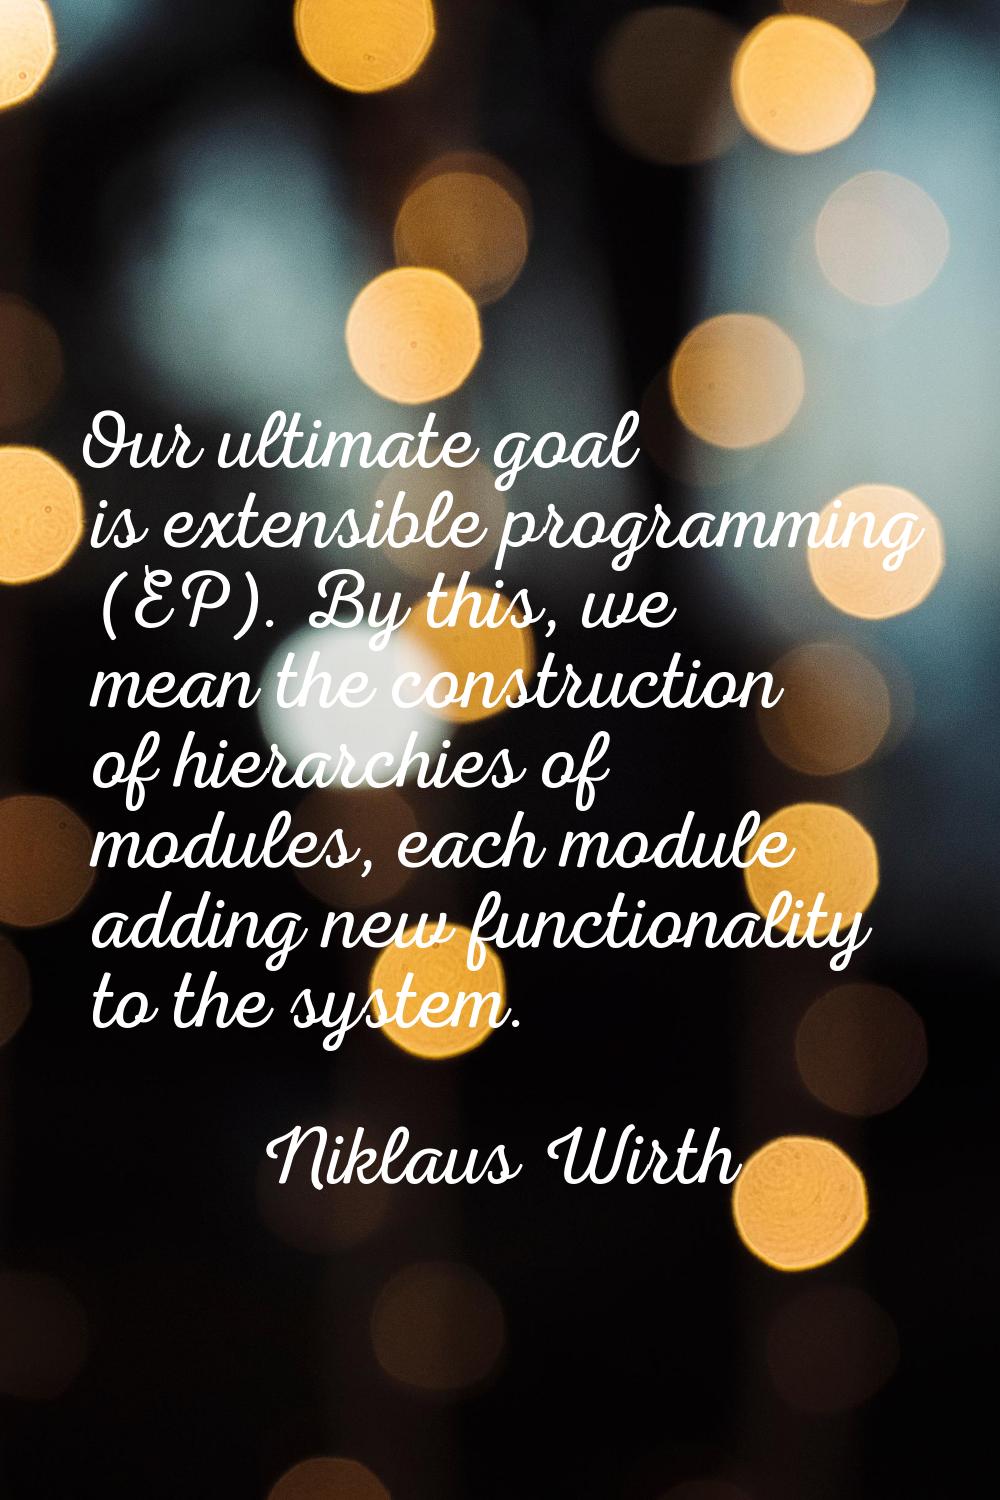 Our ultimate goal is extensible programming (EP). By this, we mean the construction of hierarchies 